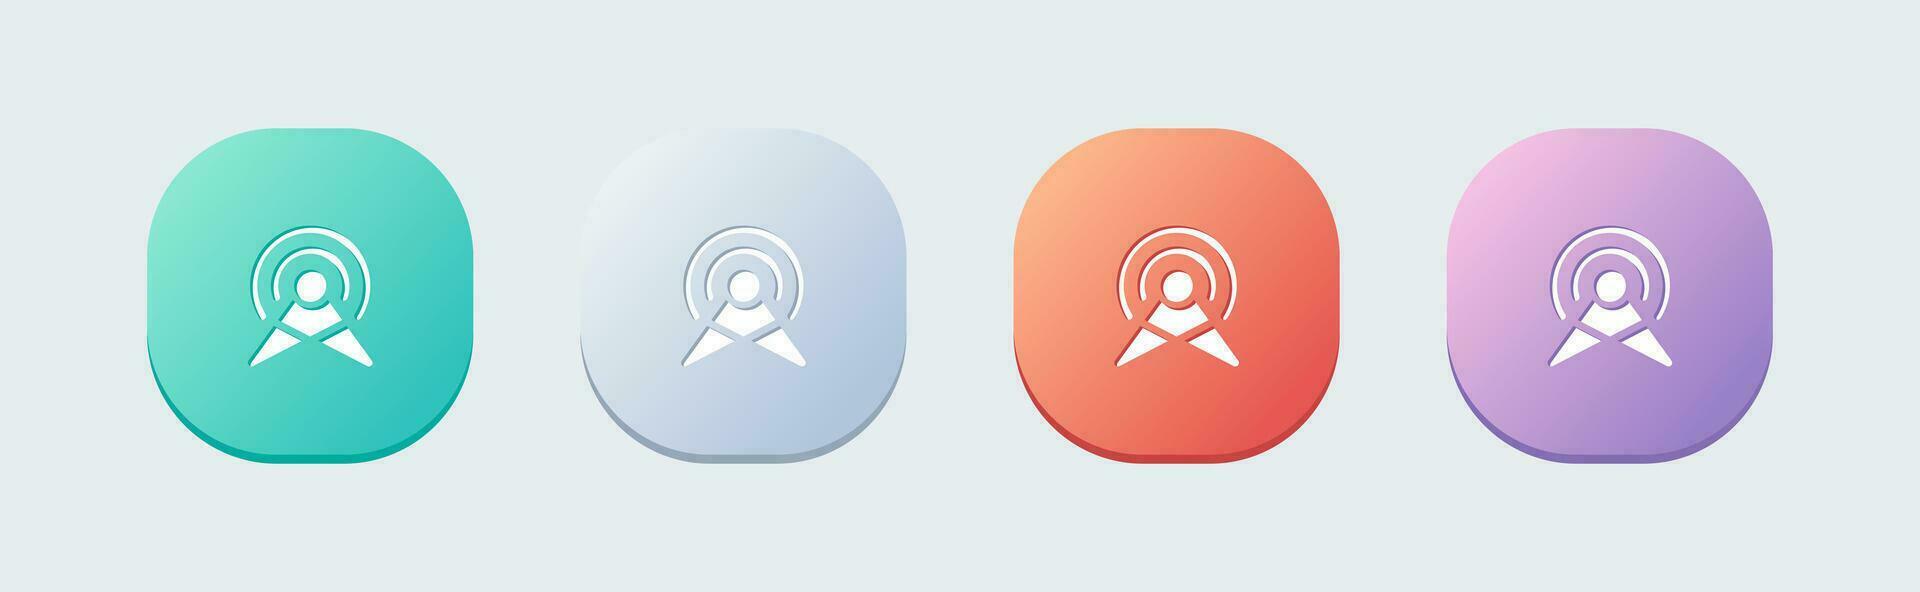 Broadcast solid icon in flat design style. Online signs vector illustration.